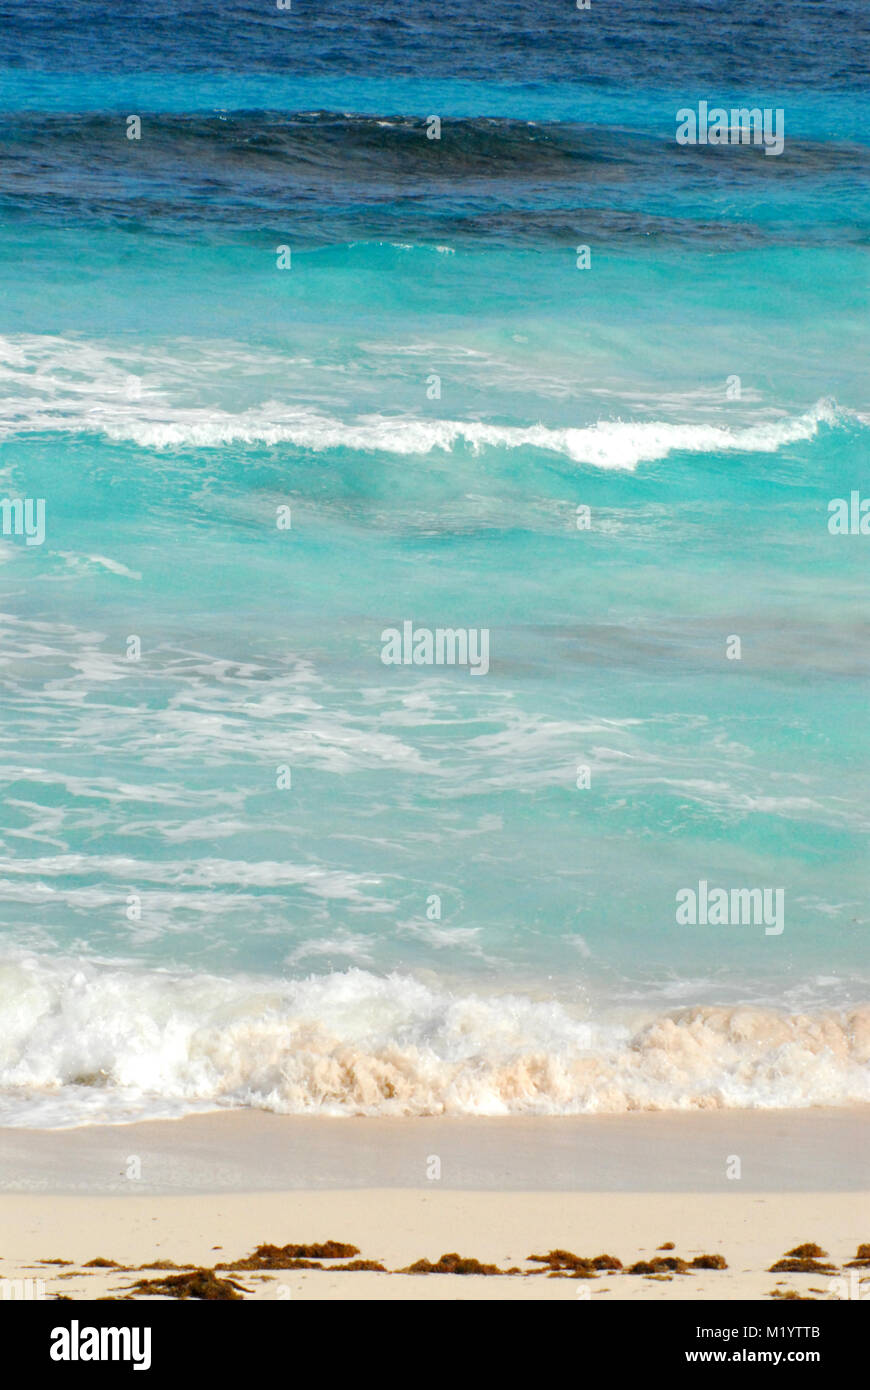 Bahamas- A beautiful vertical view of the turquoise sea surrounding the island of Eleuthera. Stock Photo